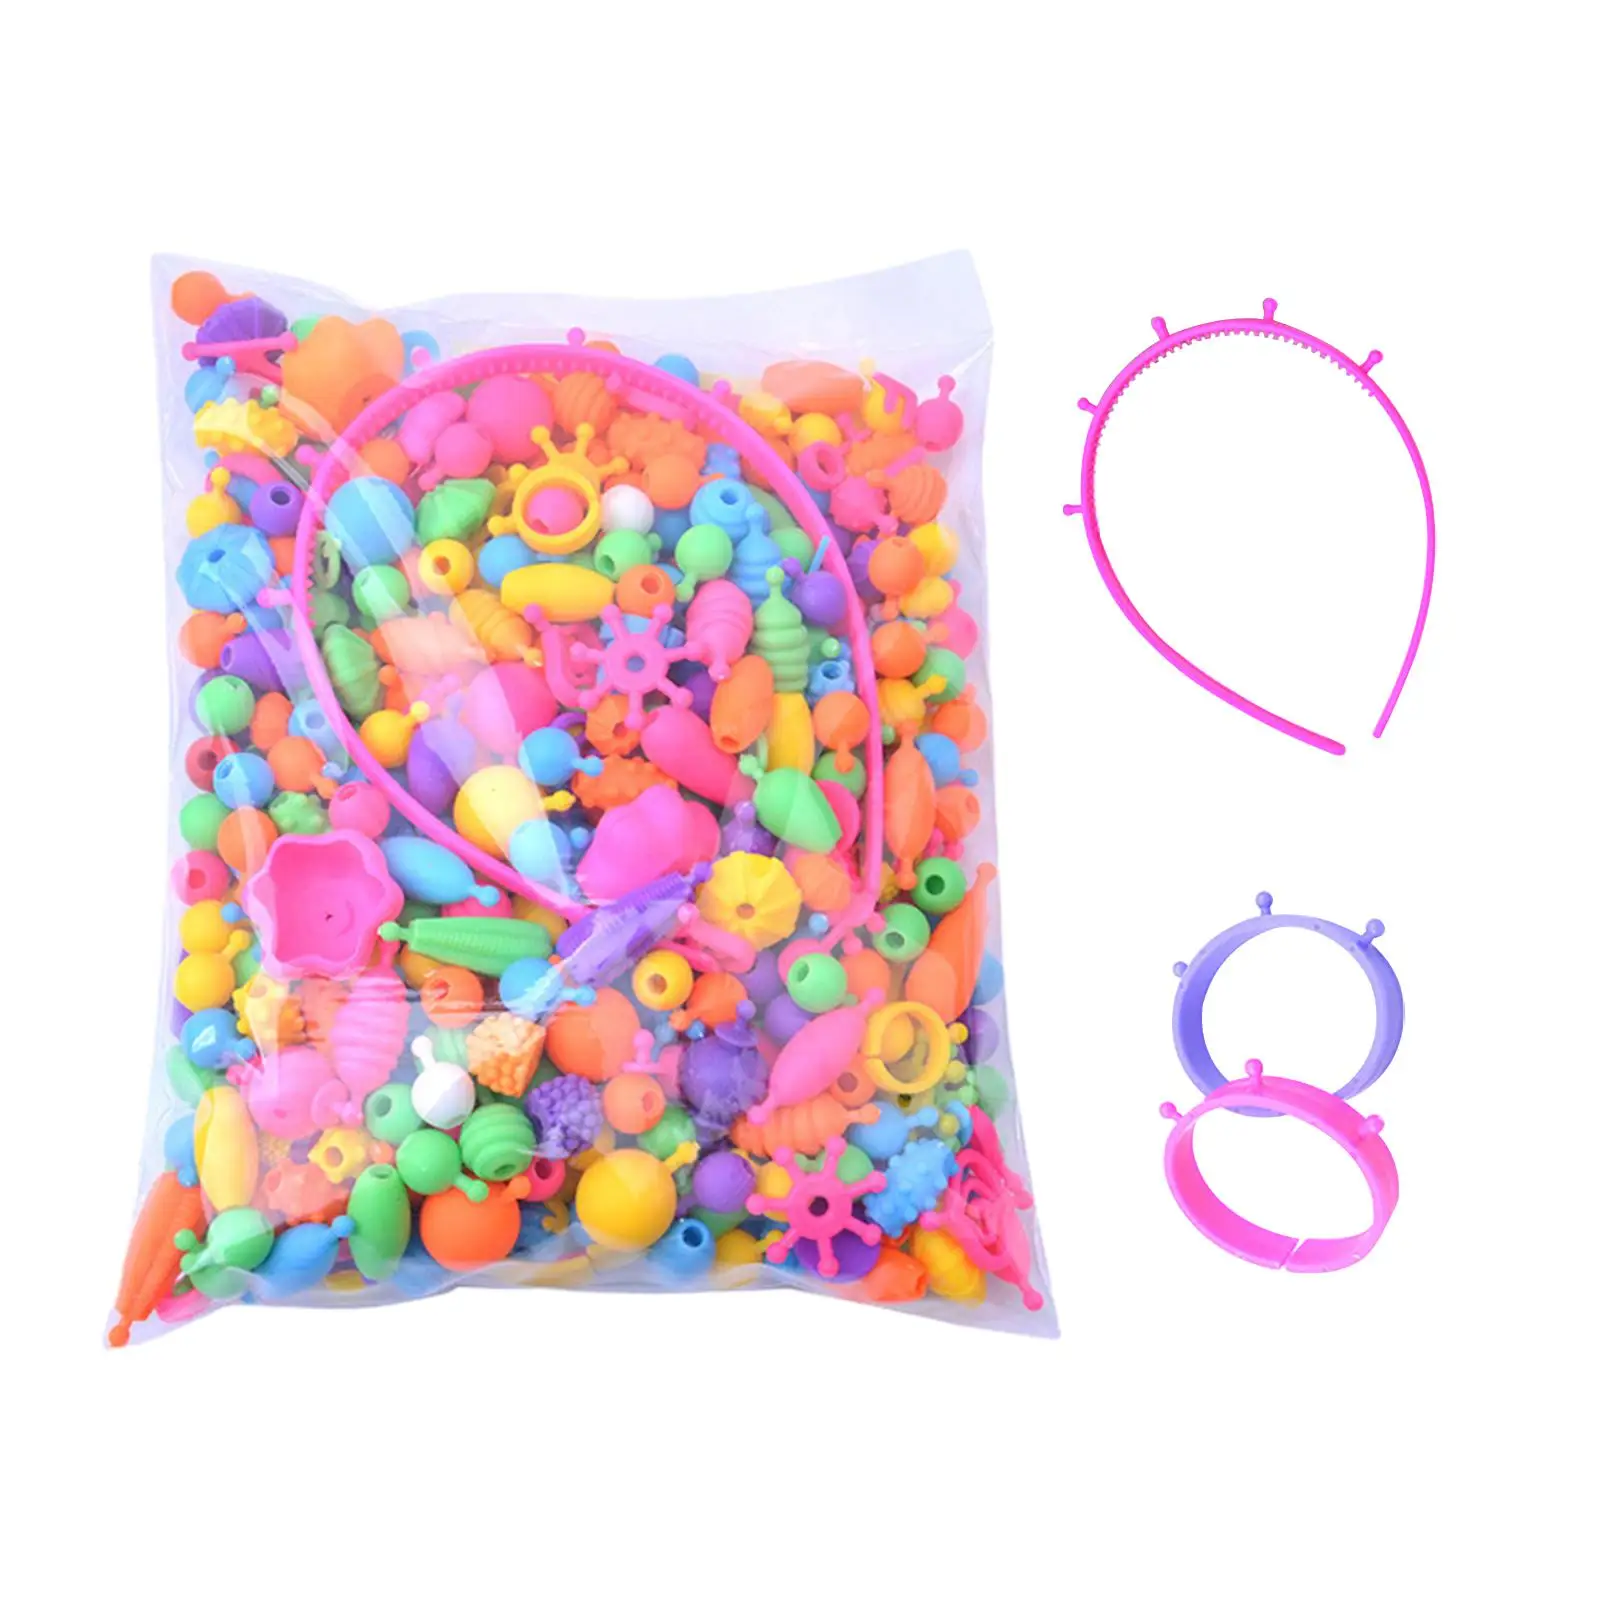 Beads Kids DIY Jewelry Making Kit Bead Kit Jewelry Set Snap Bead Crafts for Earrings Necklace Bracelet Birthday Gift Children